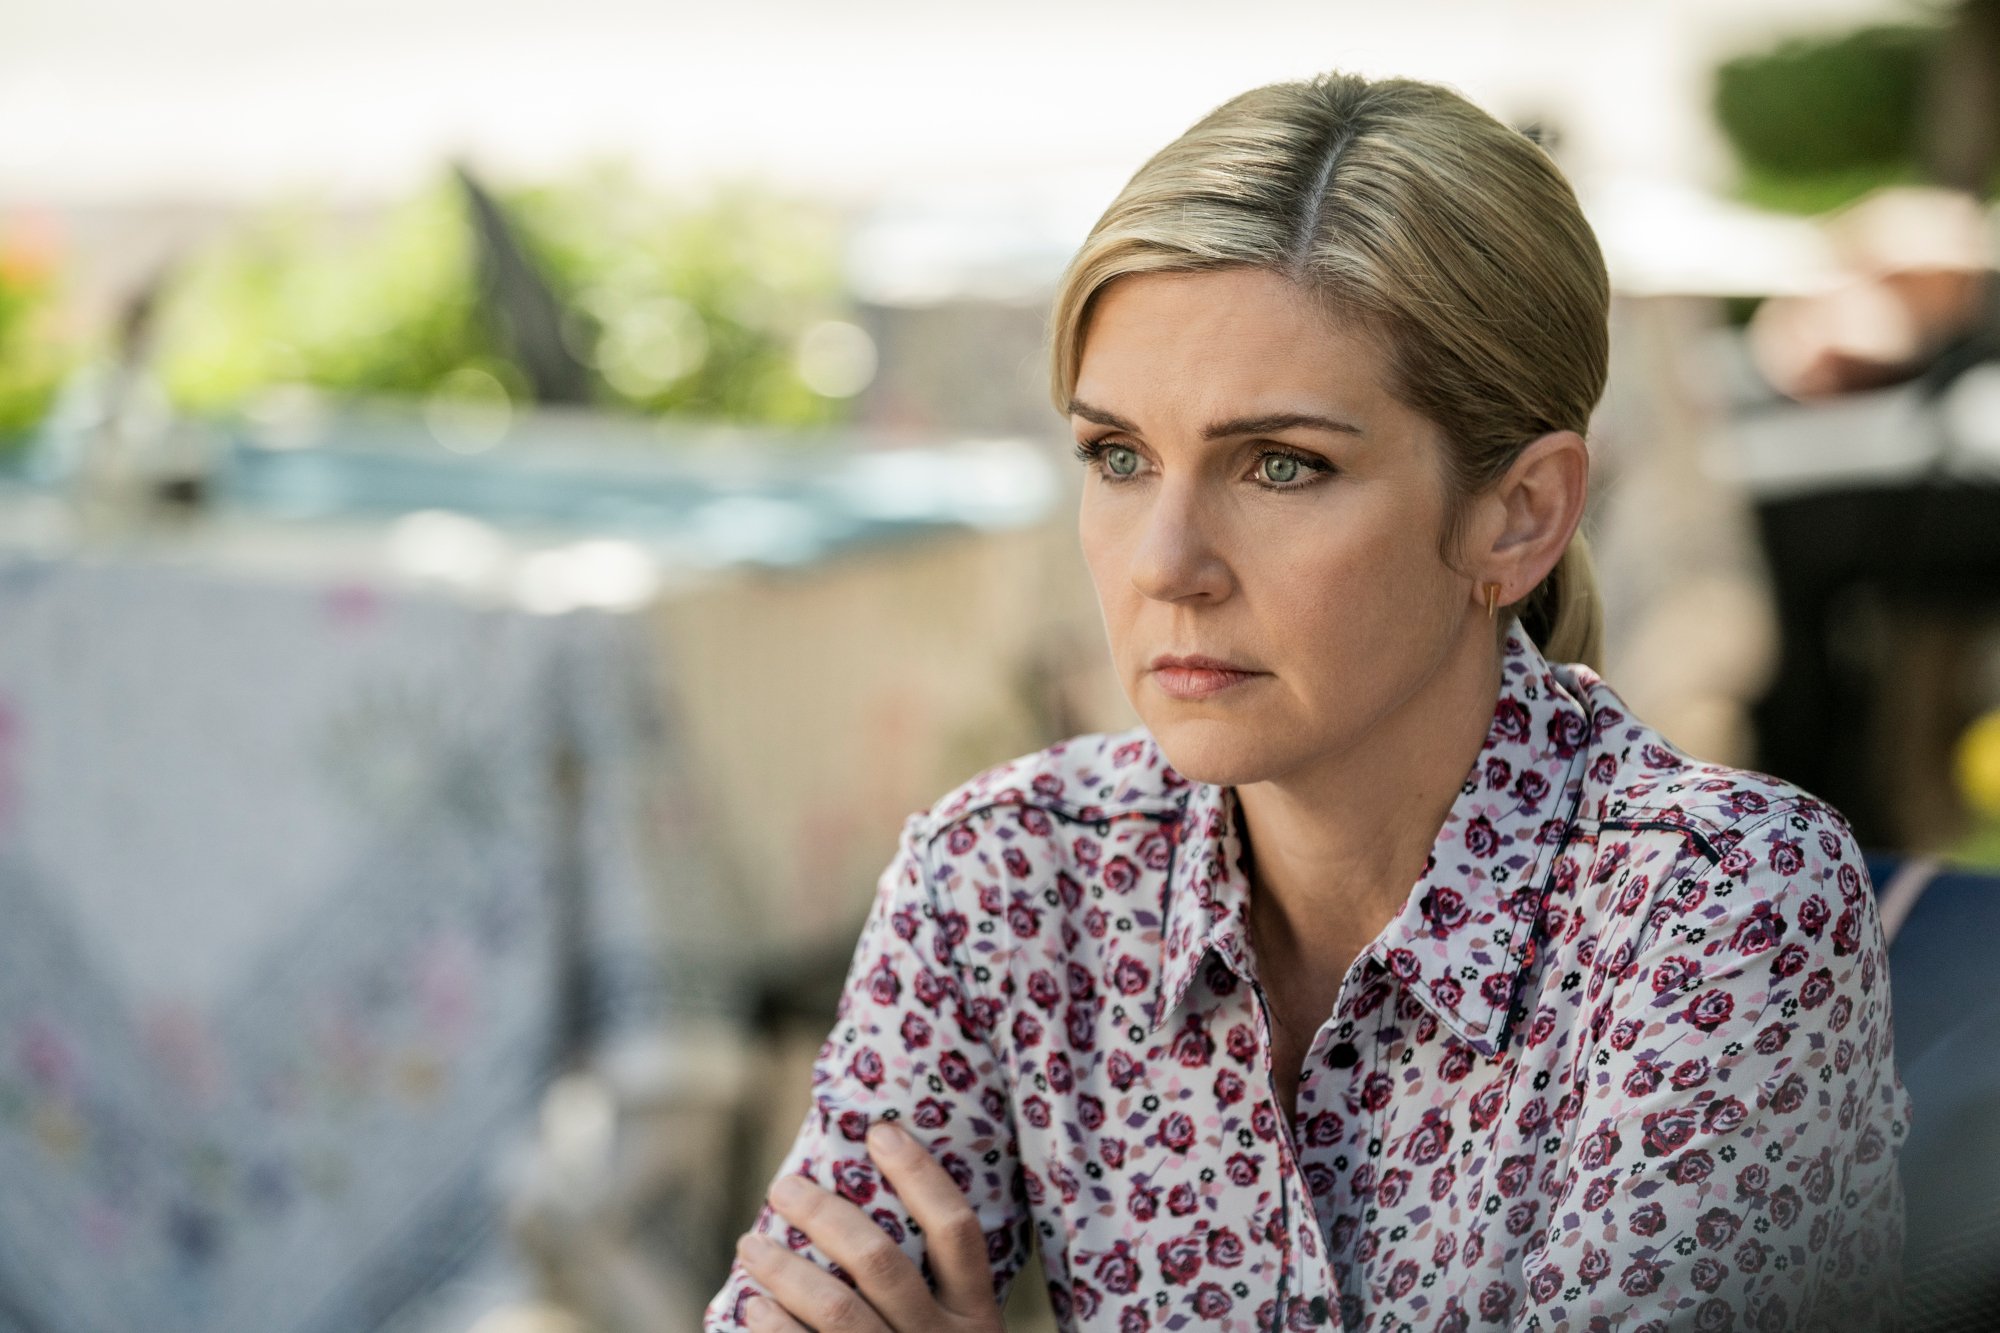 Rhea Seehorn as Kim Wexler in 'Better Call Saul' Season 6 Episode 4. She's sitting at a table, her hair is in a ponytail, and she's wearing a white and red blouse.